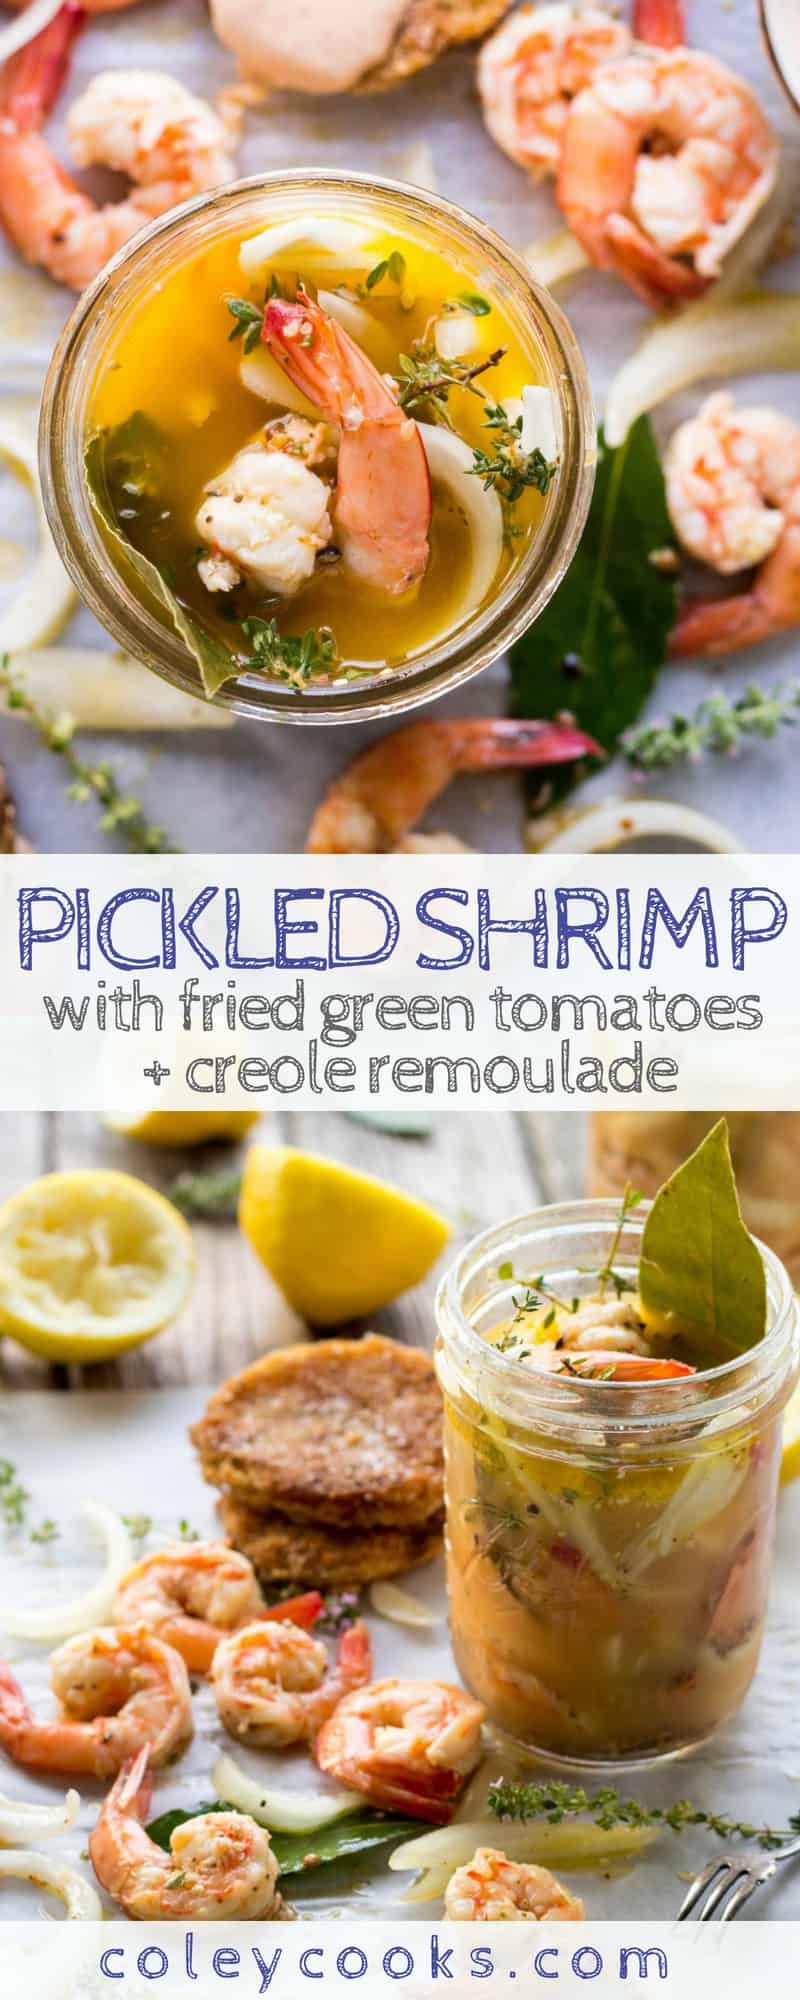 PICKLED SHRIMP with FRIED GREEN TOMATOES + CREOLE REMOULADE | Easy shrimp appetizer recipe! Tangy quick pickled shrimp with classic fried green tomatoes and creamy remoulade. #appetizer #recipe #shrimp #pickled #southern #summer #creole | ColeyCooks.com